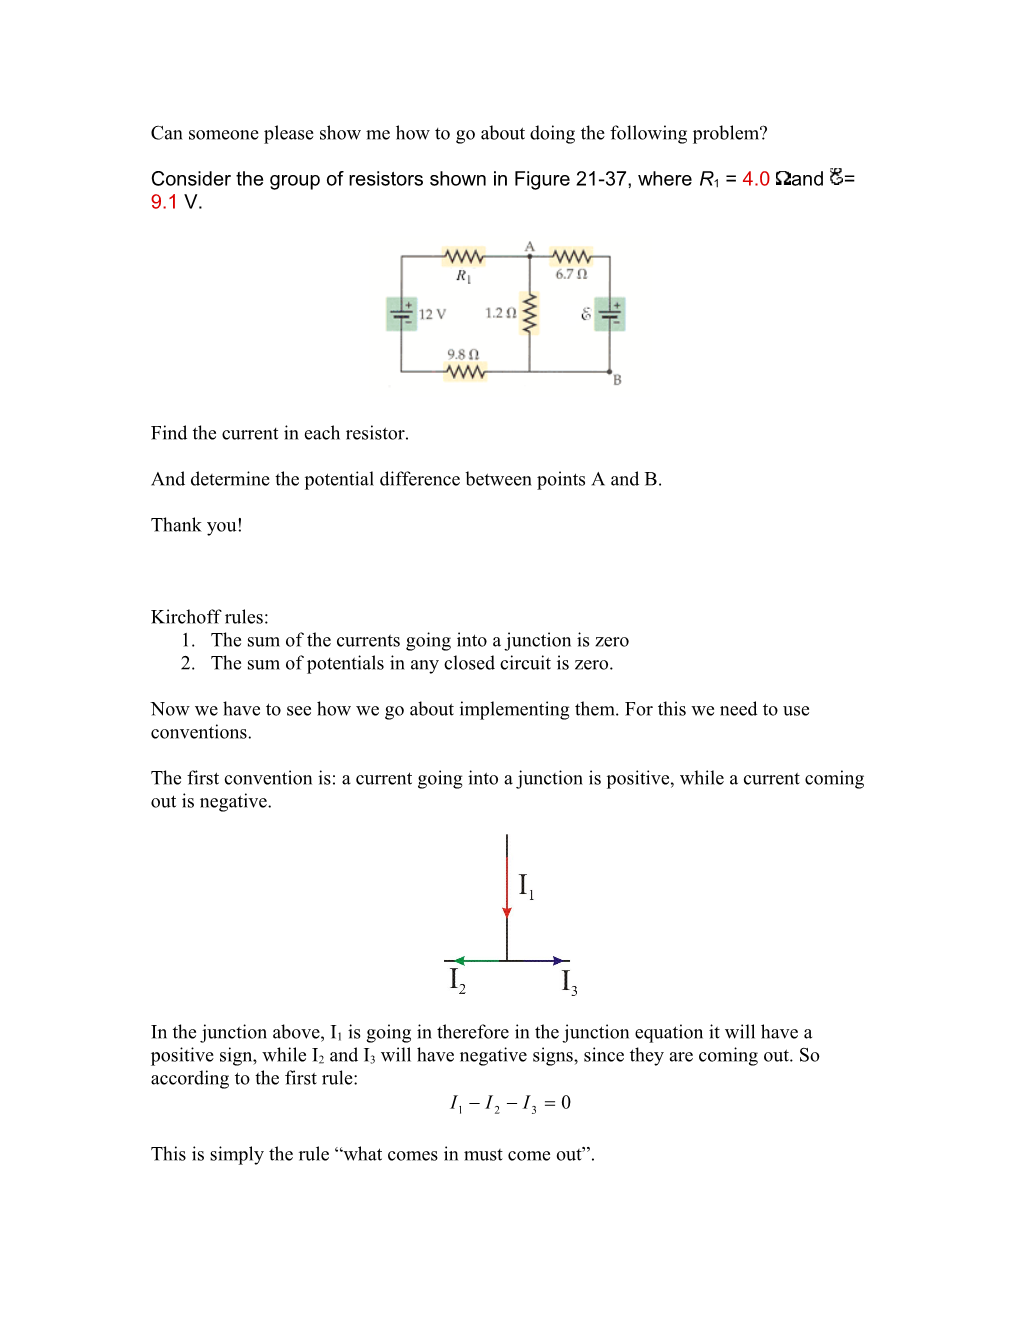 Can Someone Please Show Me How to Go About Doing the Following Problem